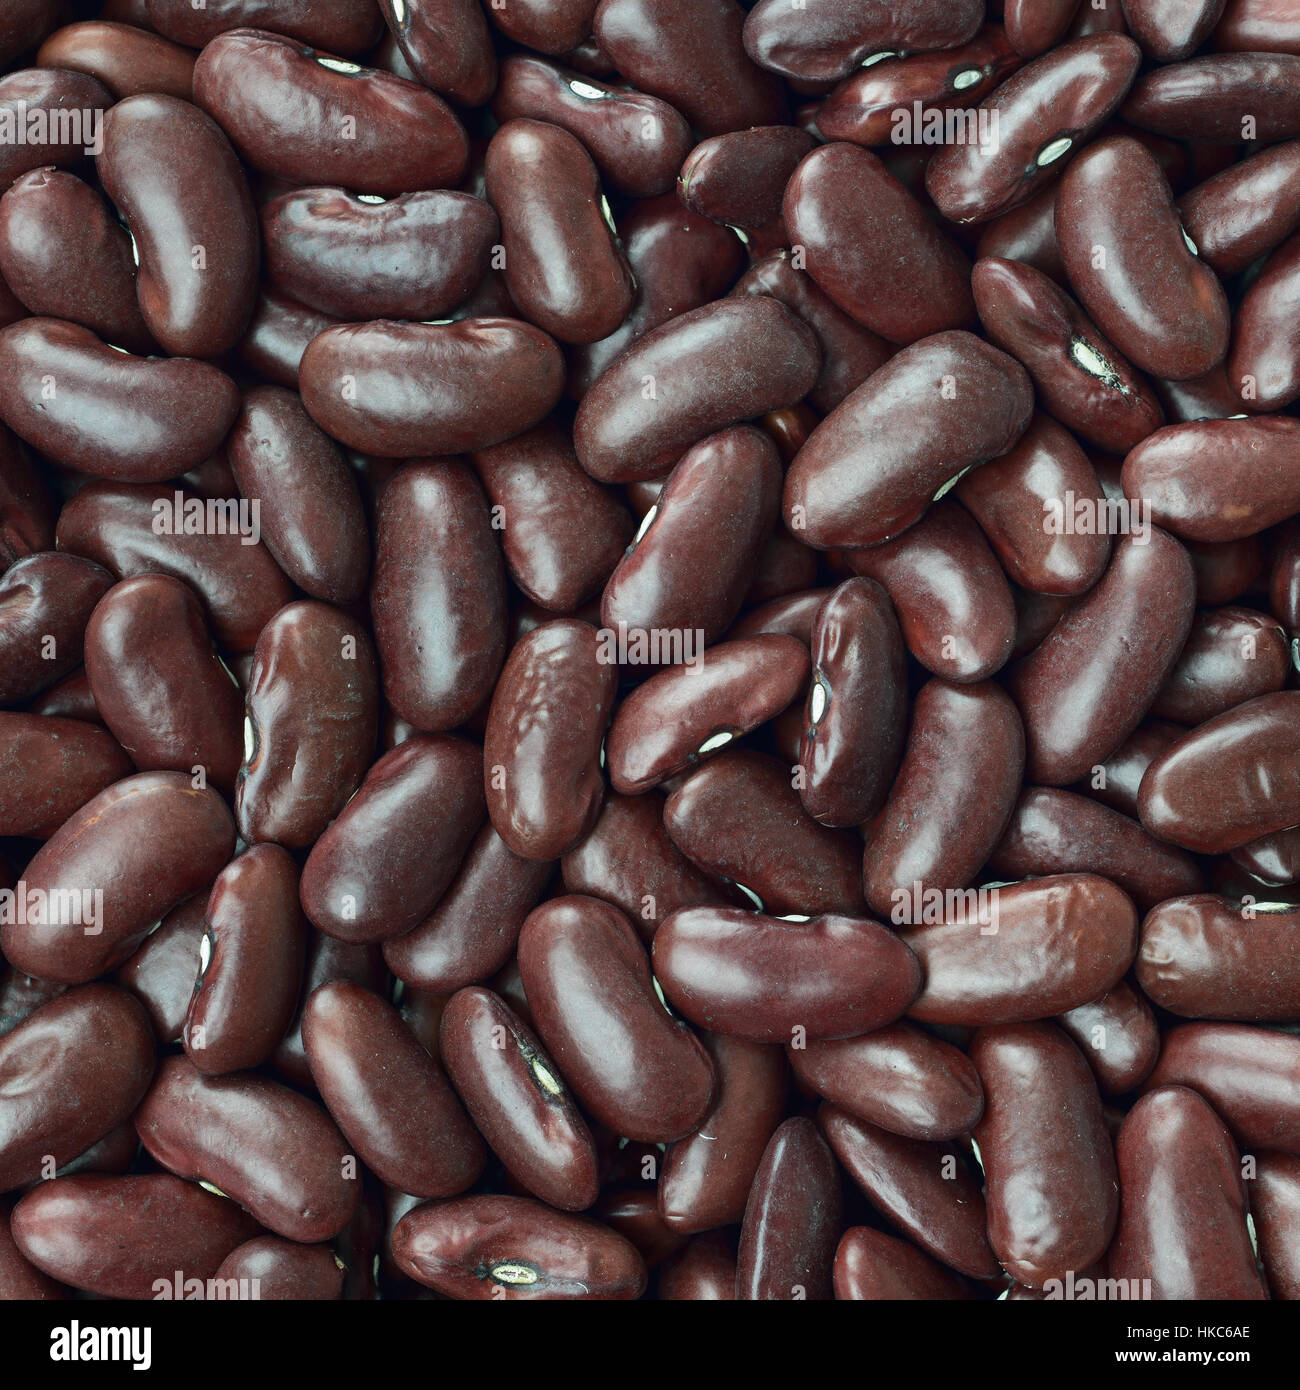 Black turtle beans texture background or pattern. Raw legume food. Stock Photo